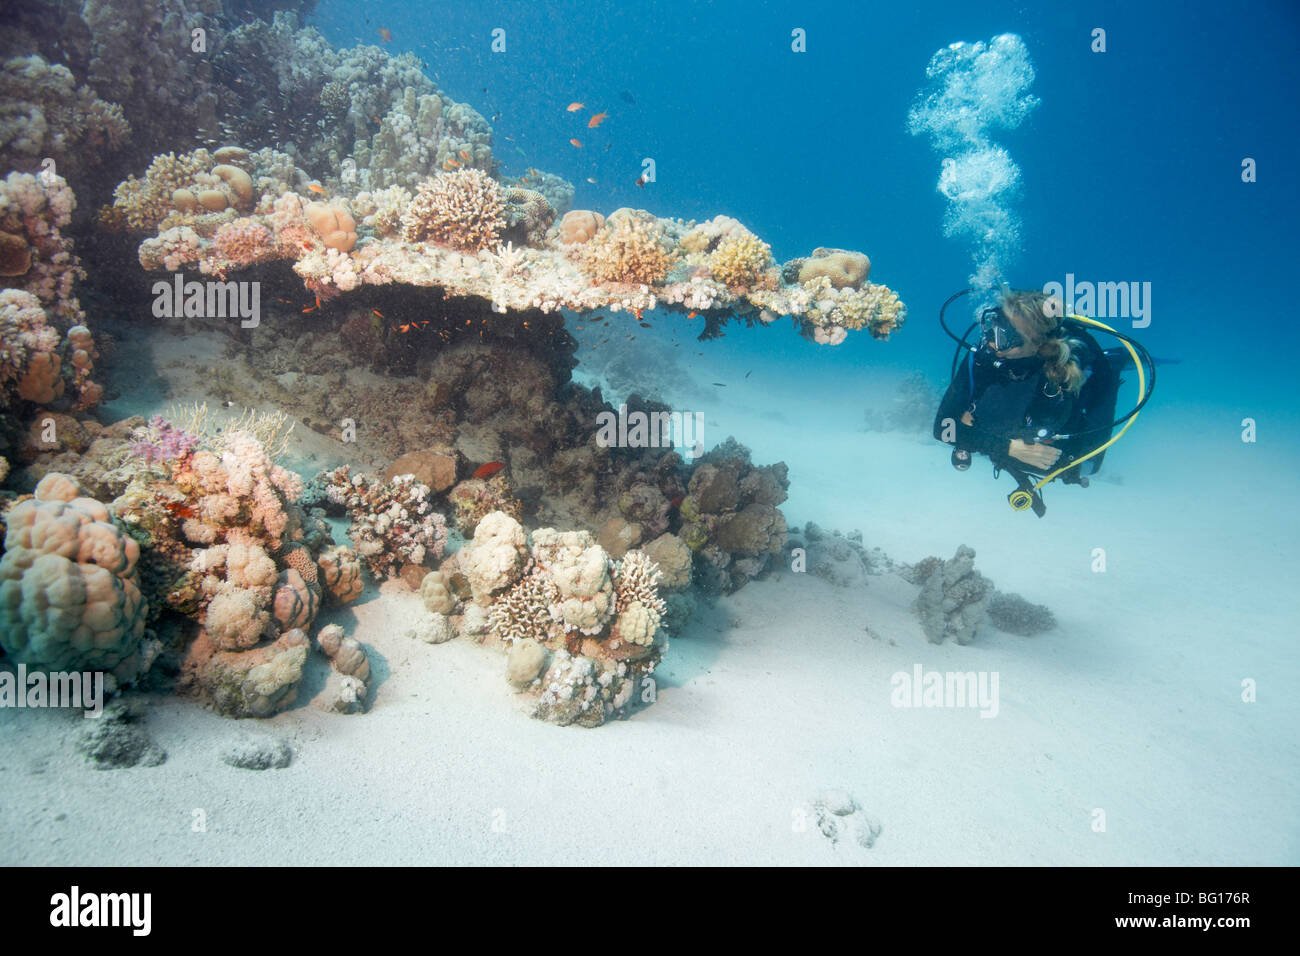 Diver beside reef Stock Photo